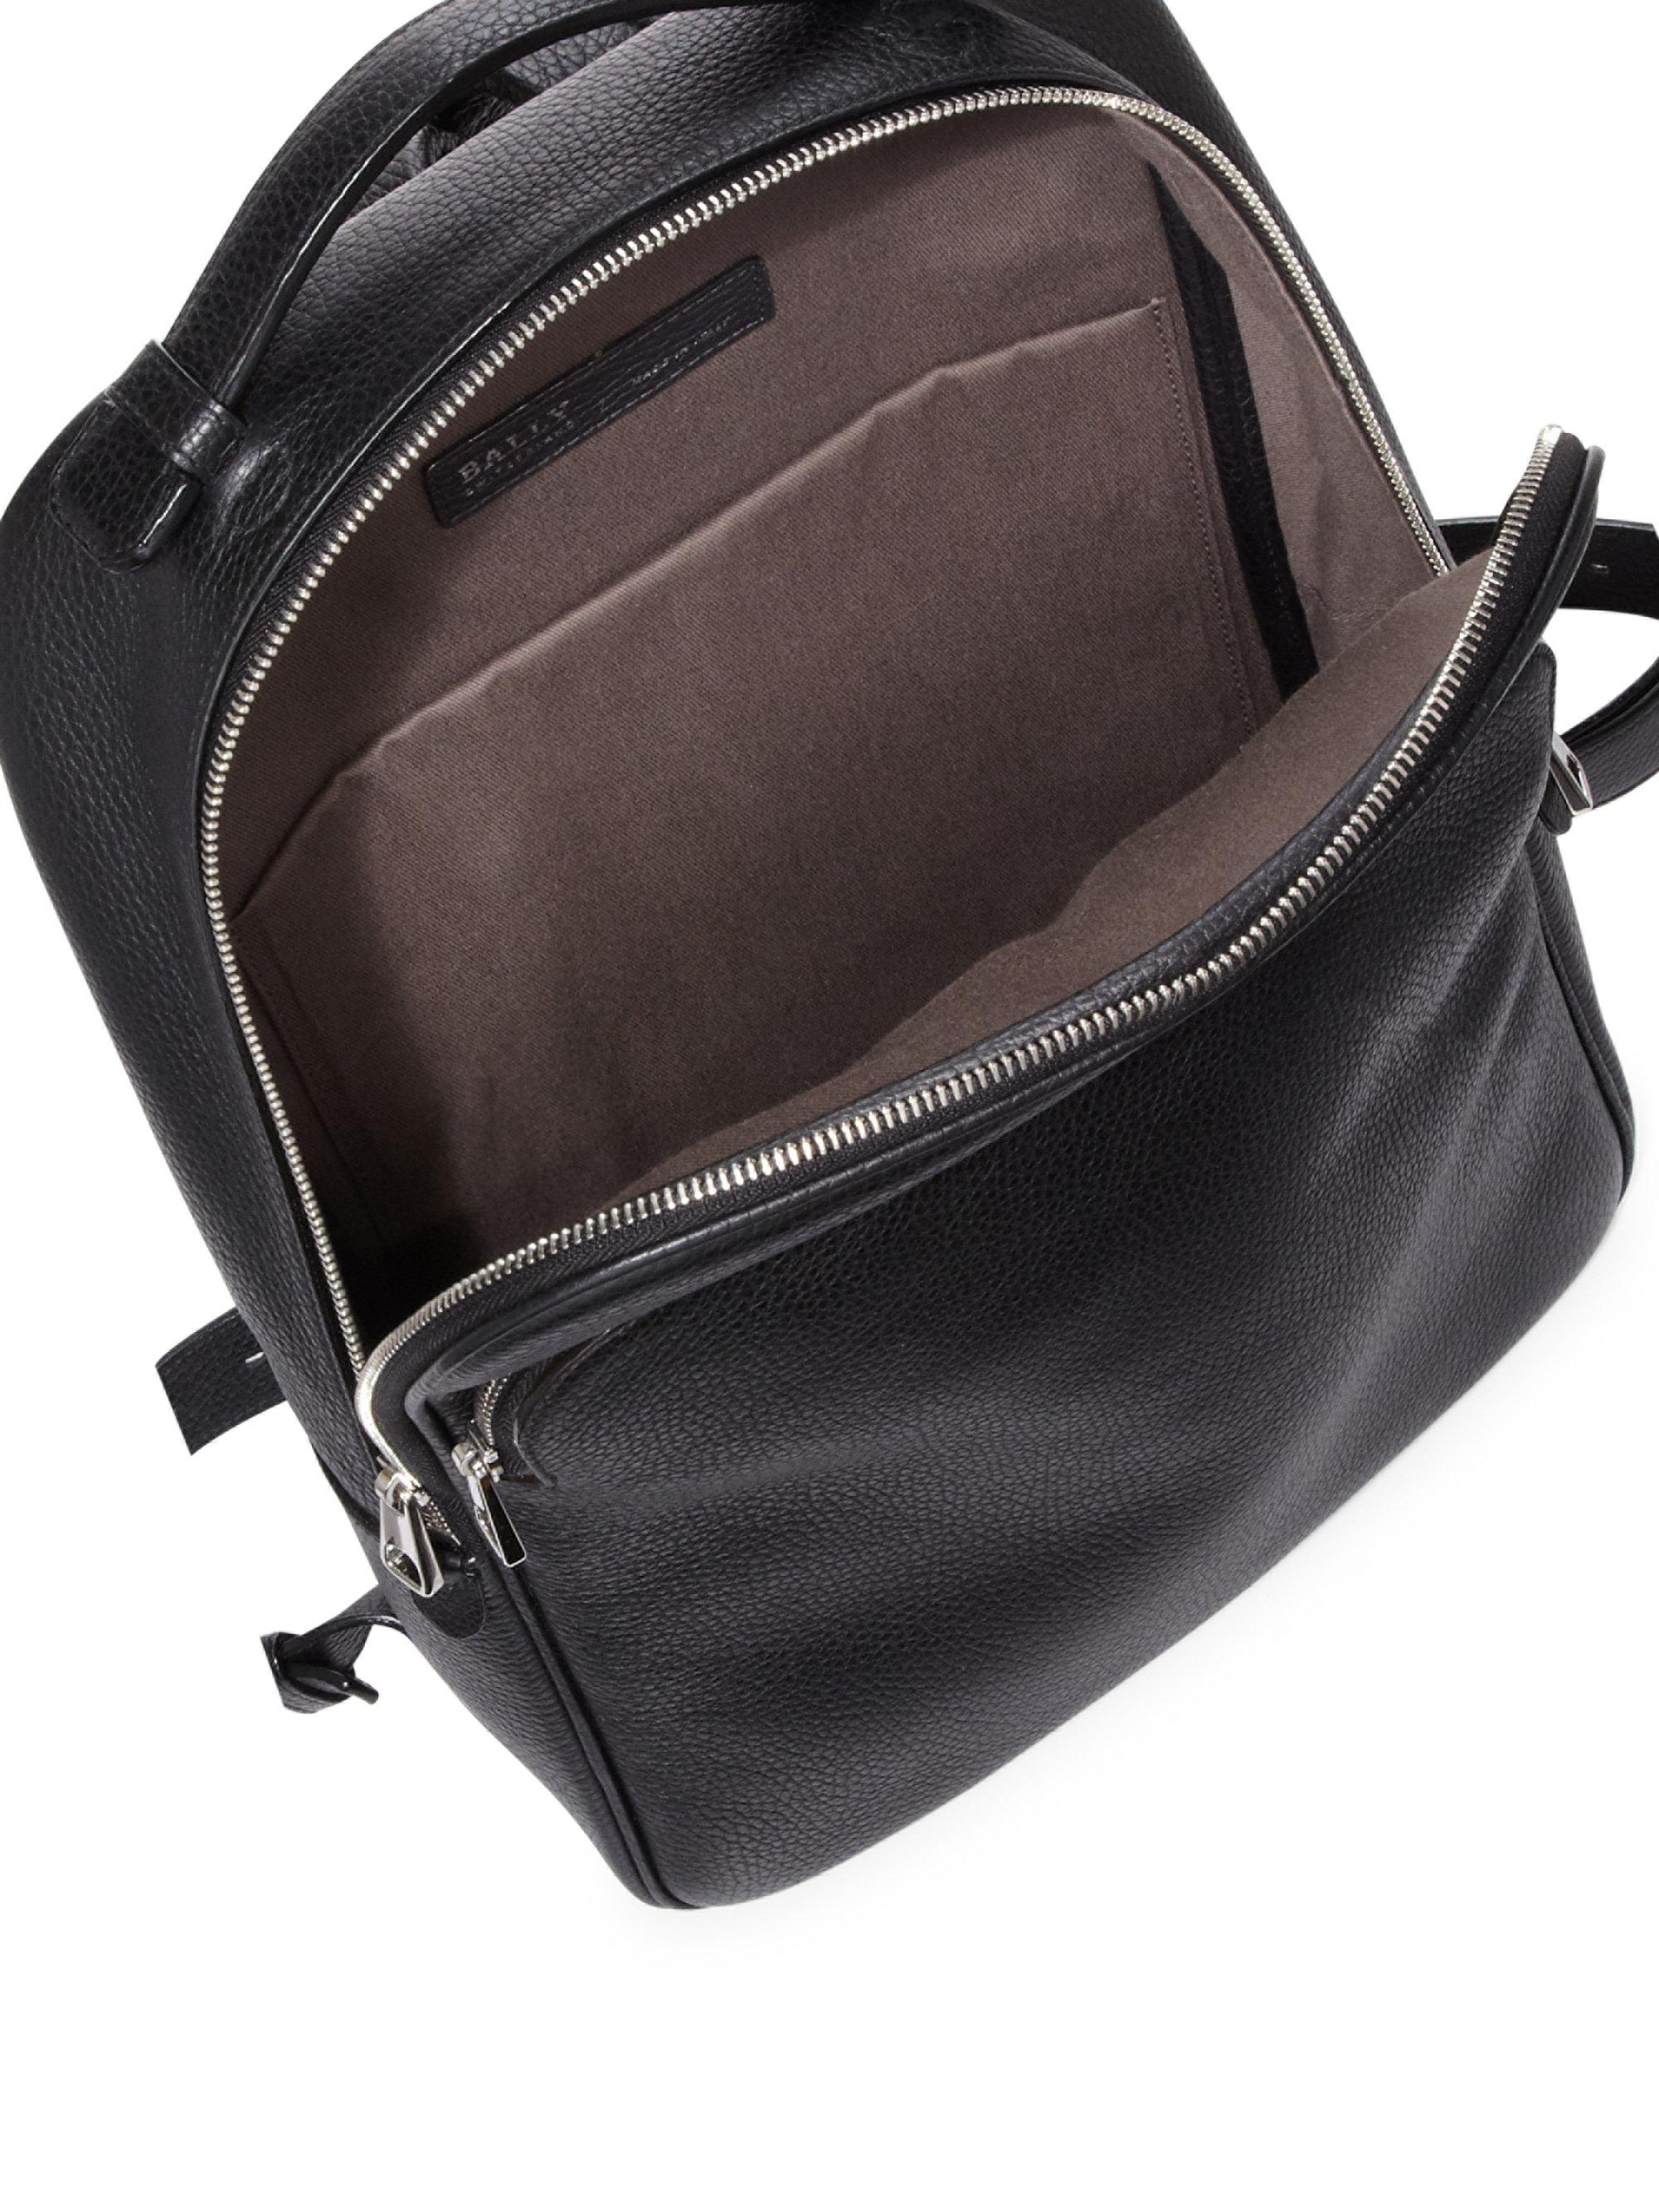 Lyst - Bally Leather Backpack in Black for Men